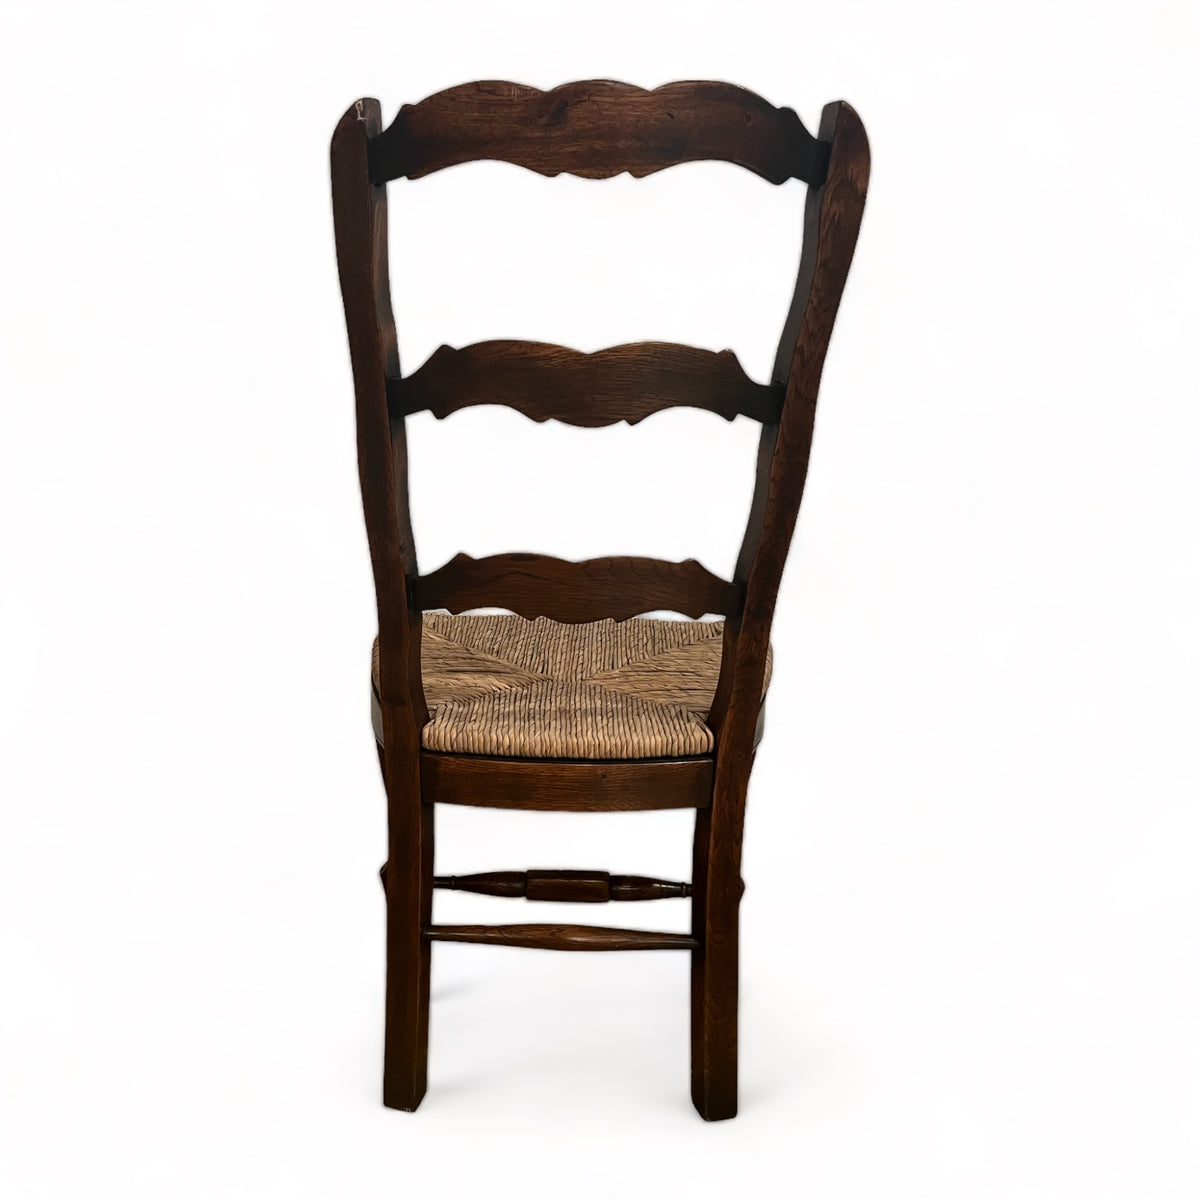 French Ladderback Chairs - Set of 4